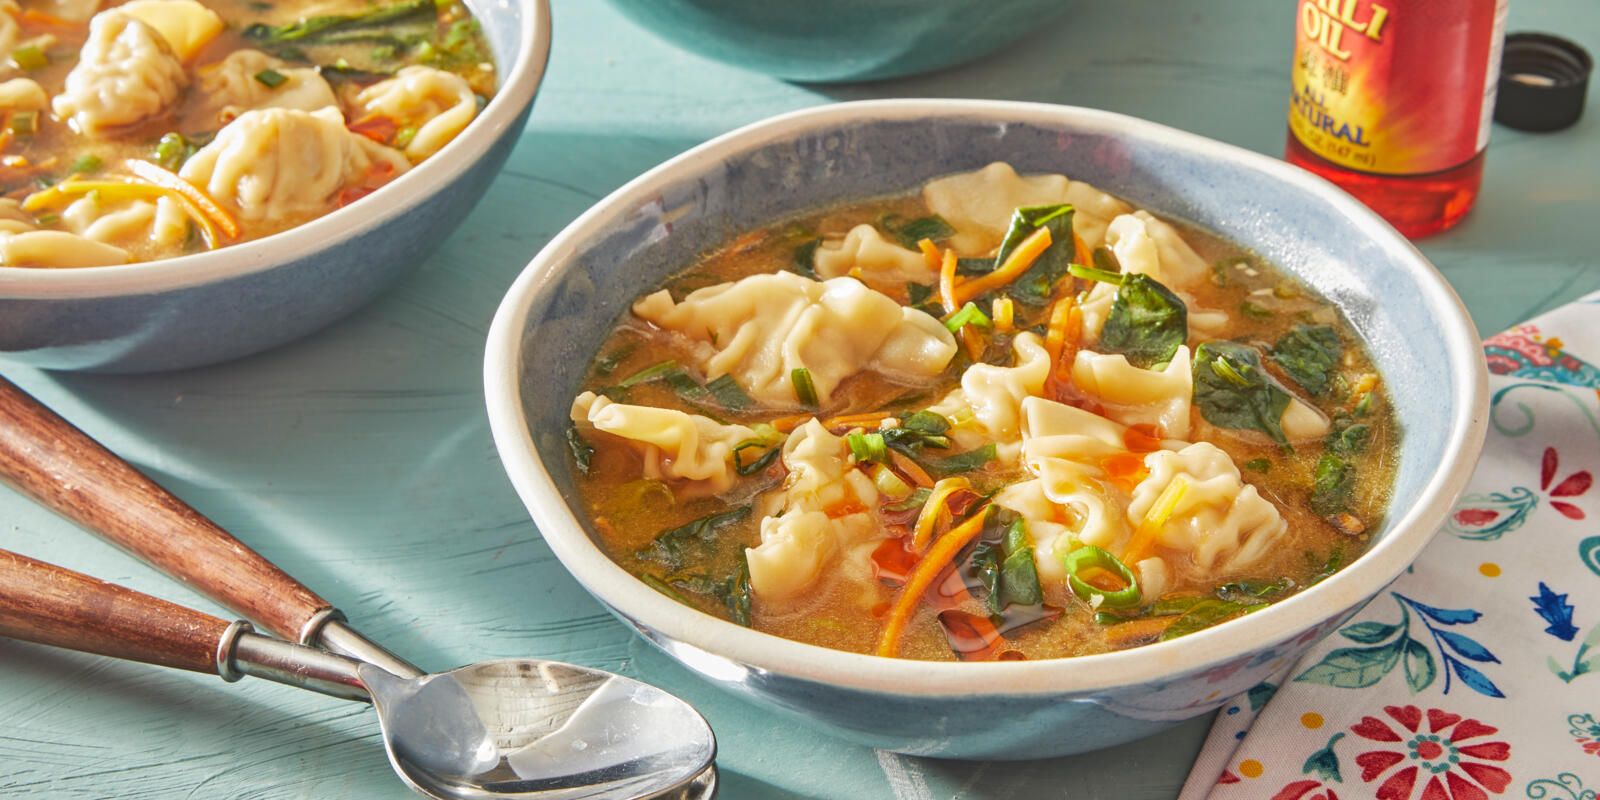 This Trader Joe's Soup Dumpling Hack Is Ready in 5 Minutes